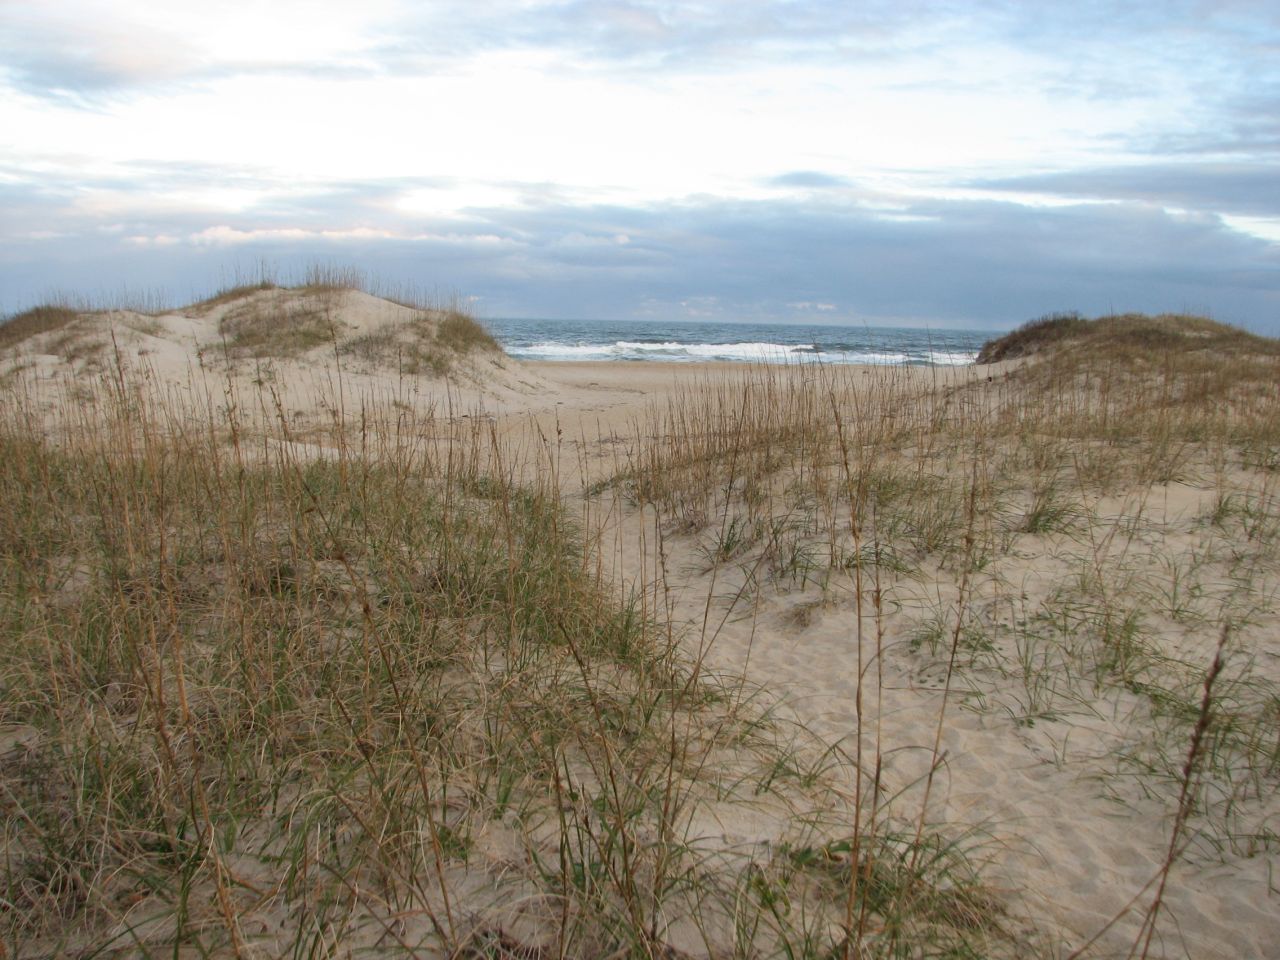 Cape Hatteras National Seashore is made up of barrier islands that protect North Carolina's mainland.